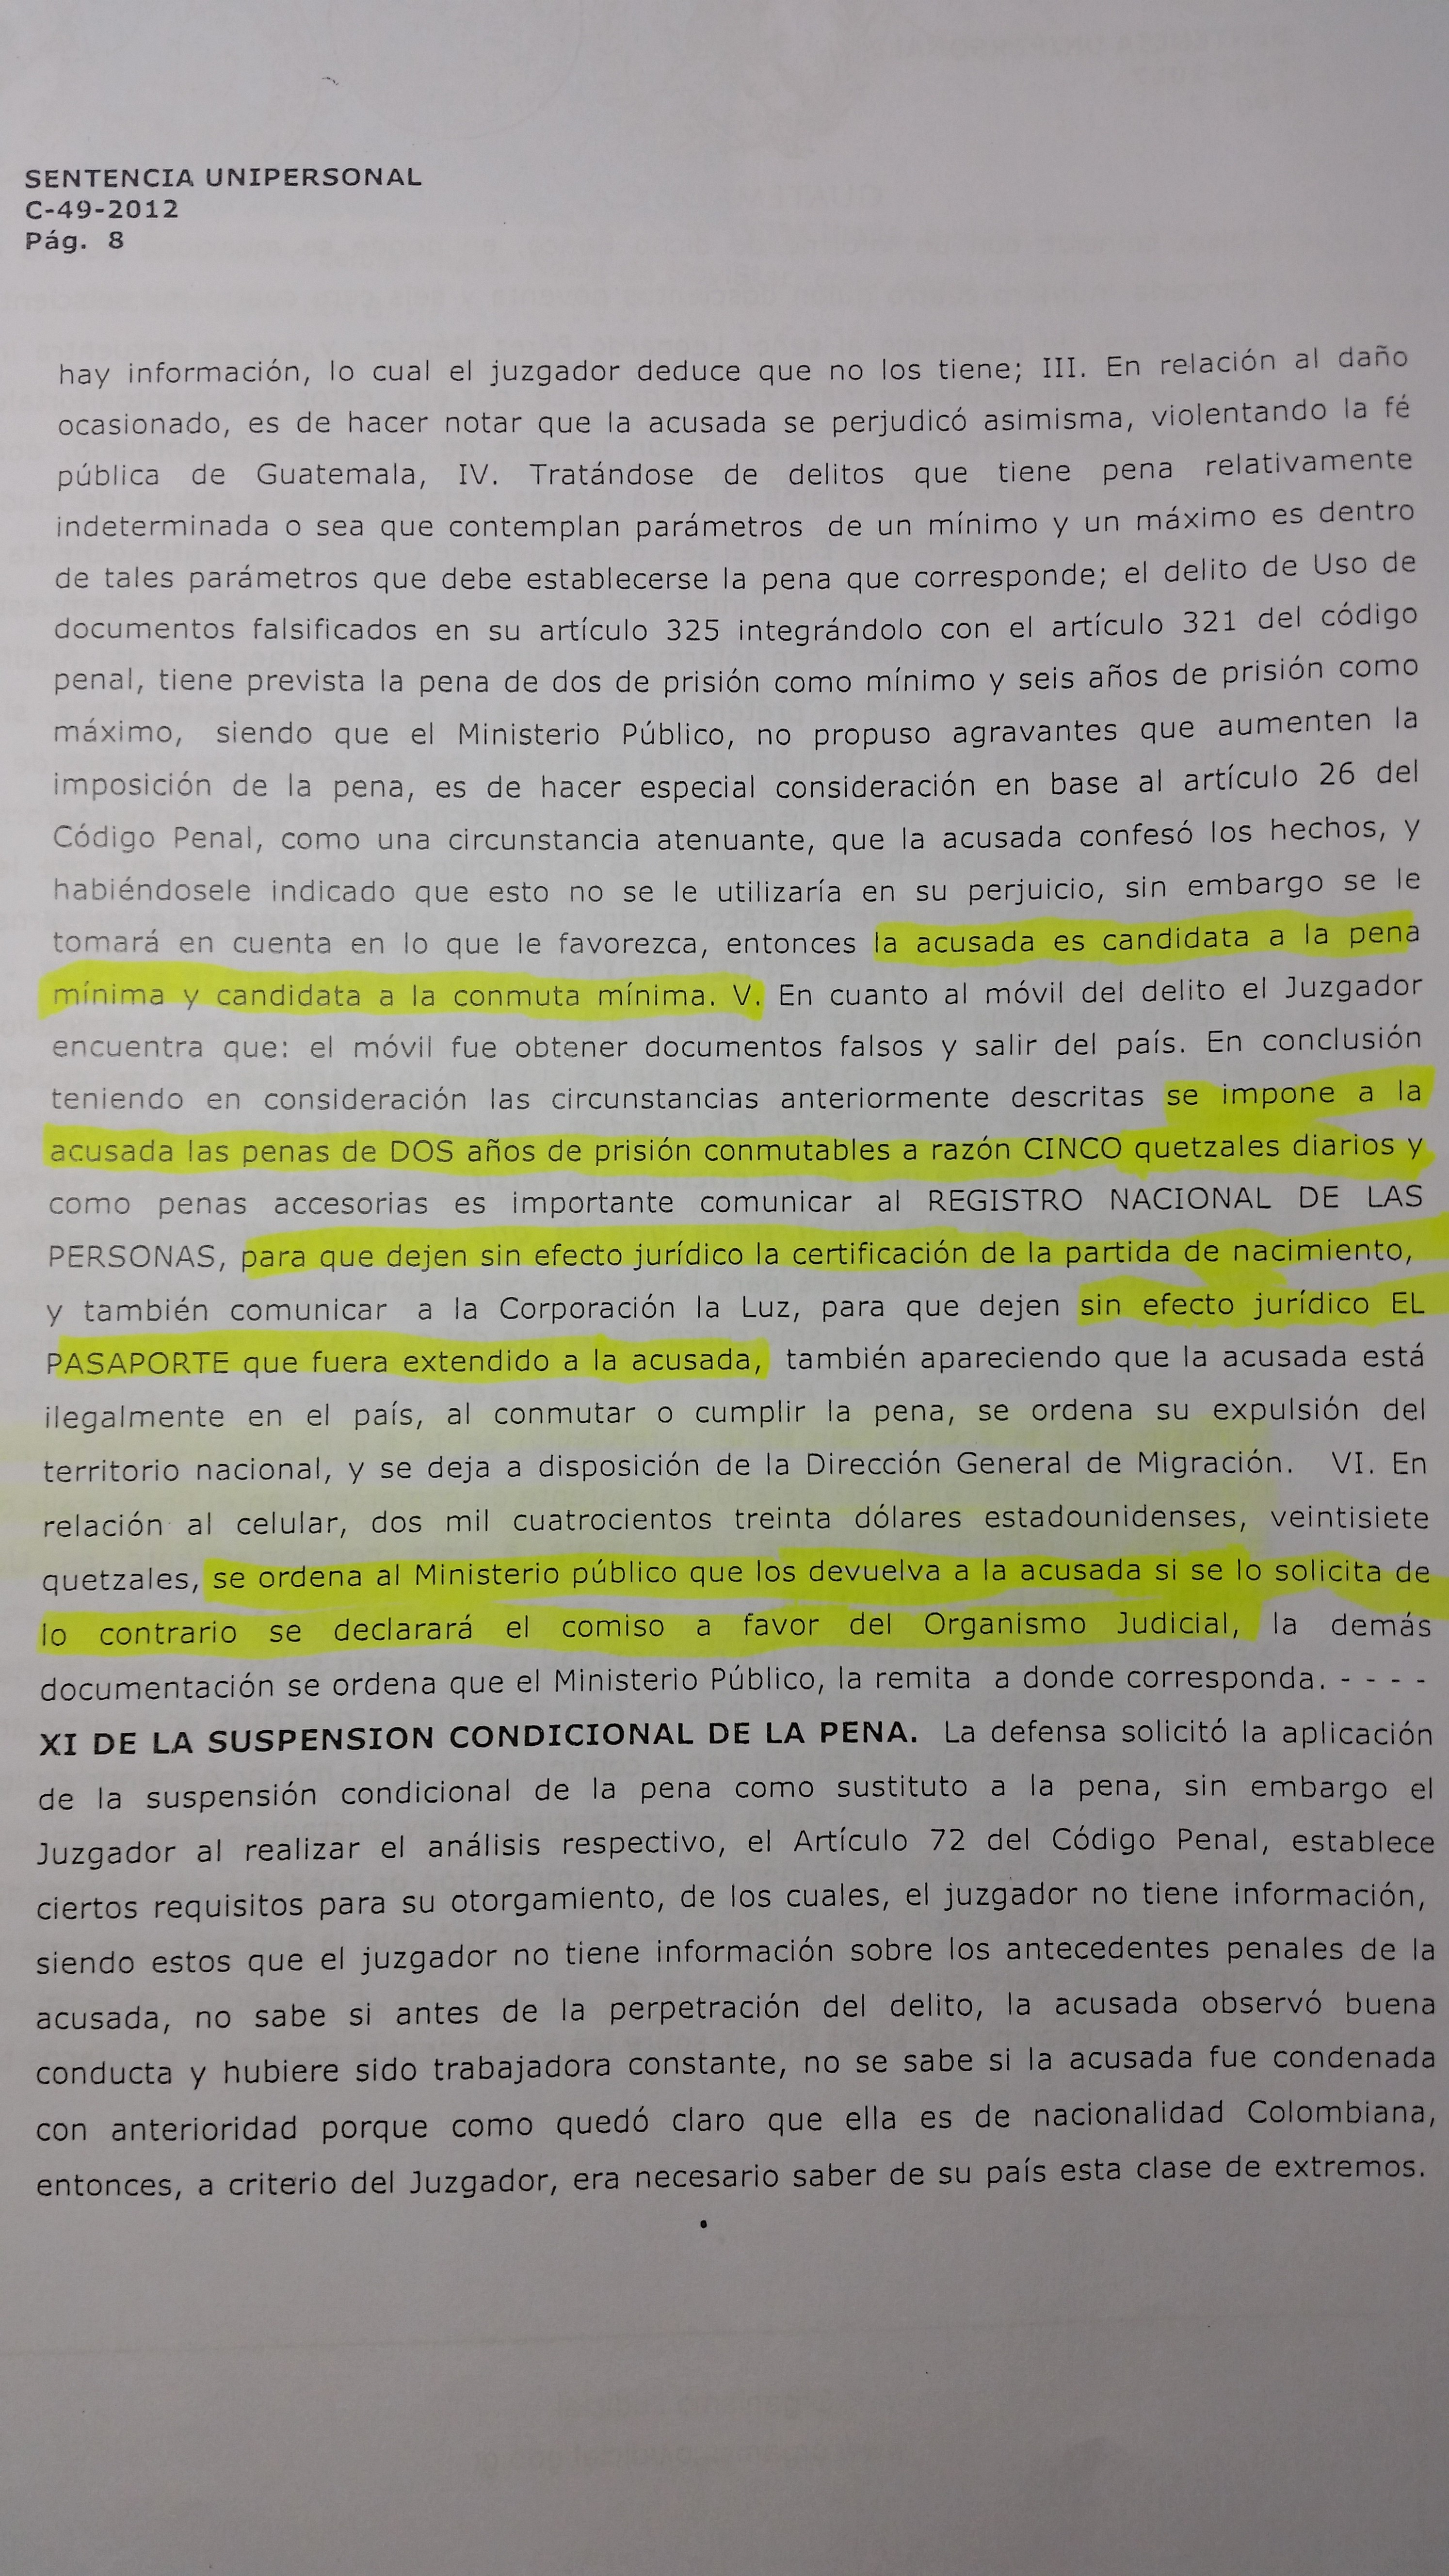 the sentence of Colombians accused of having false passports.